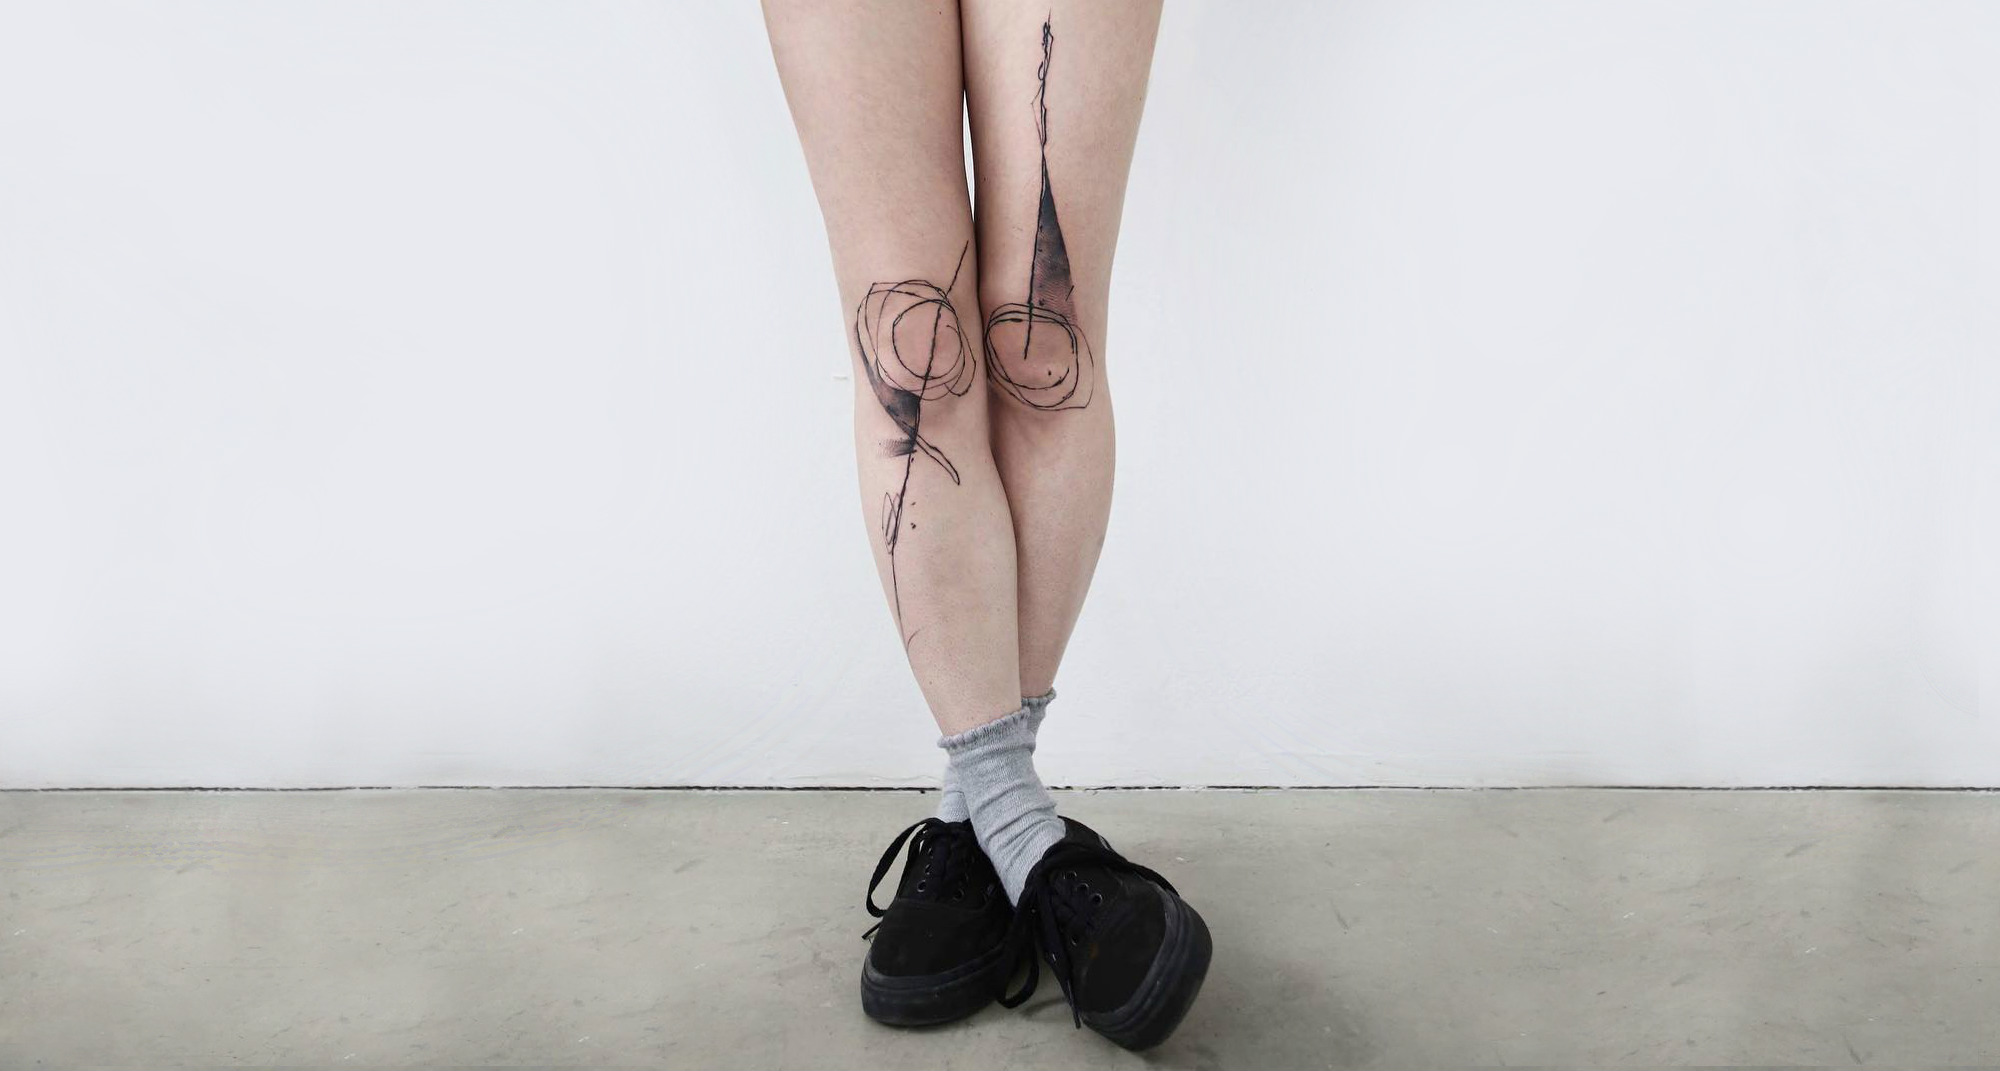 Abstract bouquet tattoos by Raz A Void Project